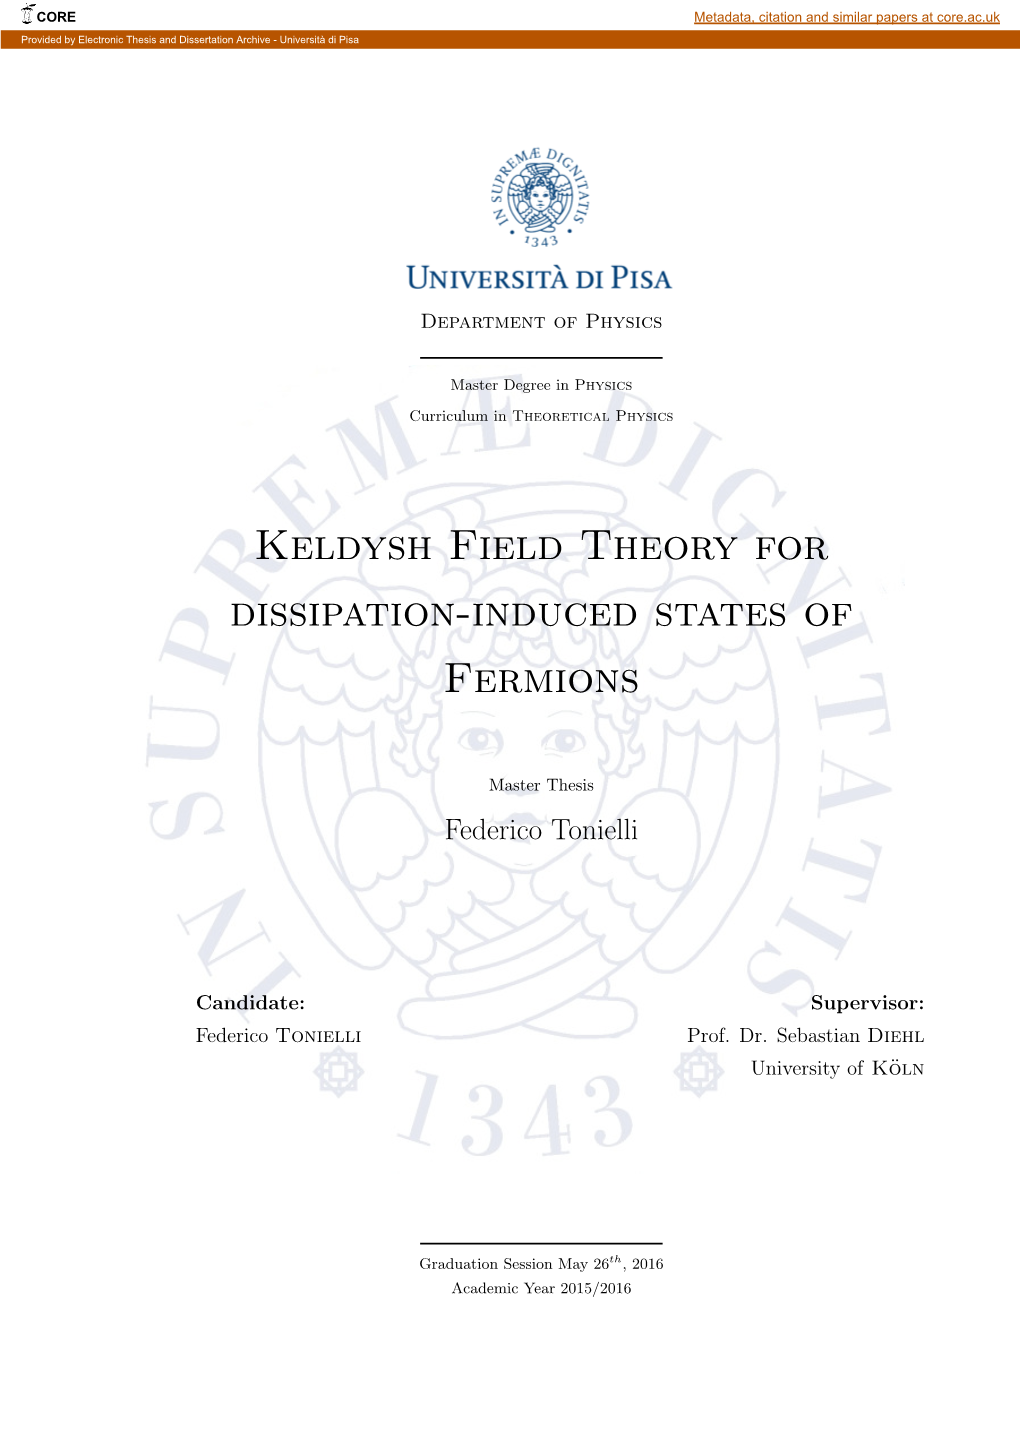 Keldysh Field Theory for Dissipation-Induced States of Fermions